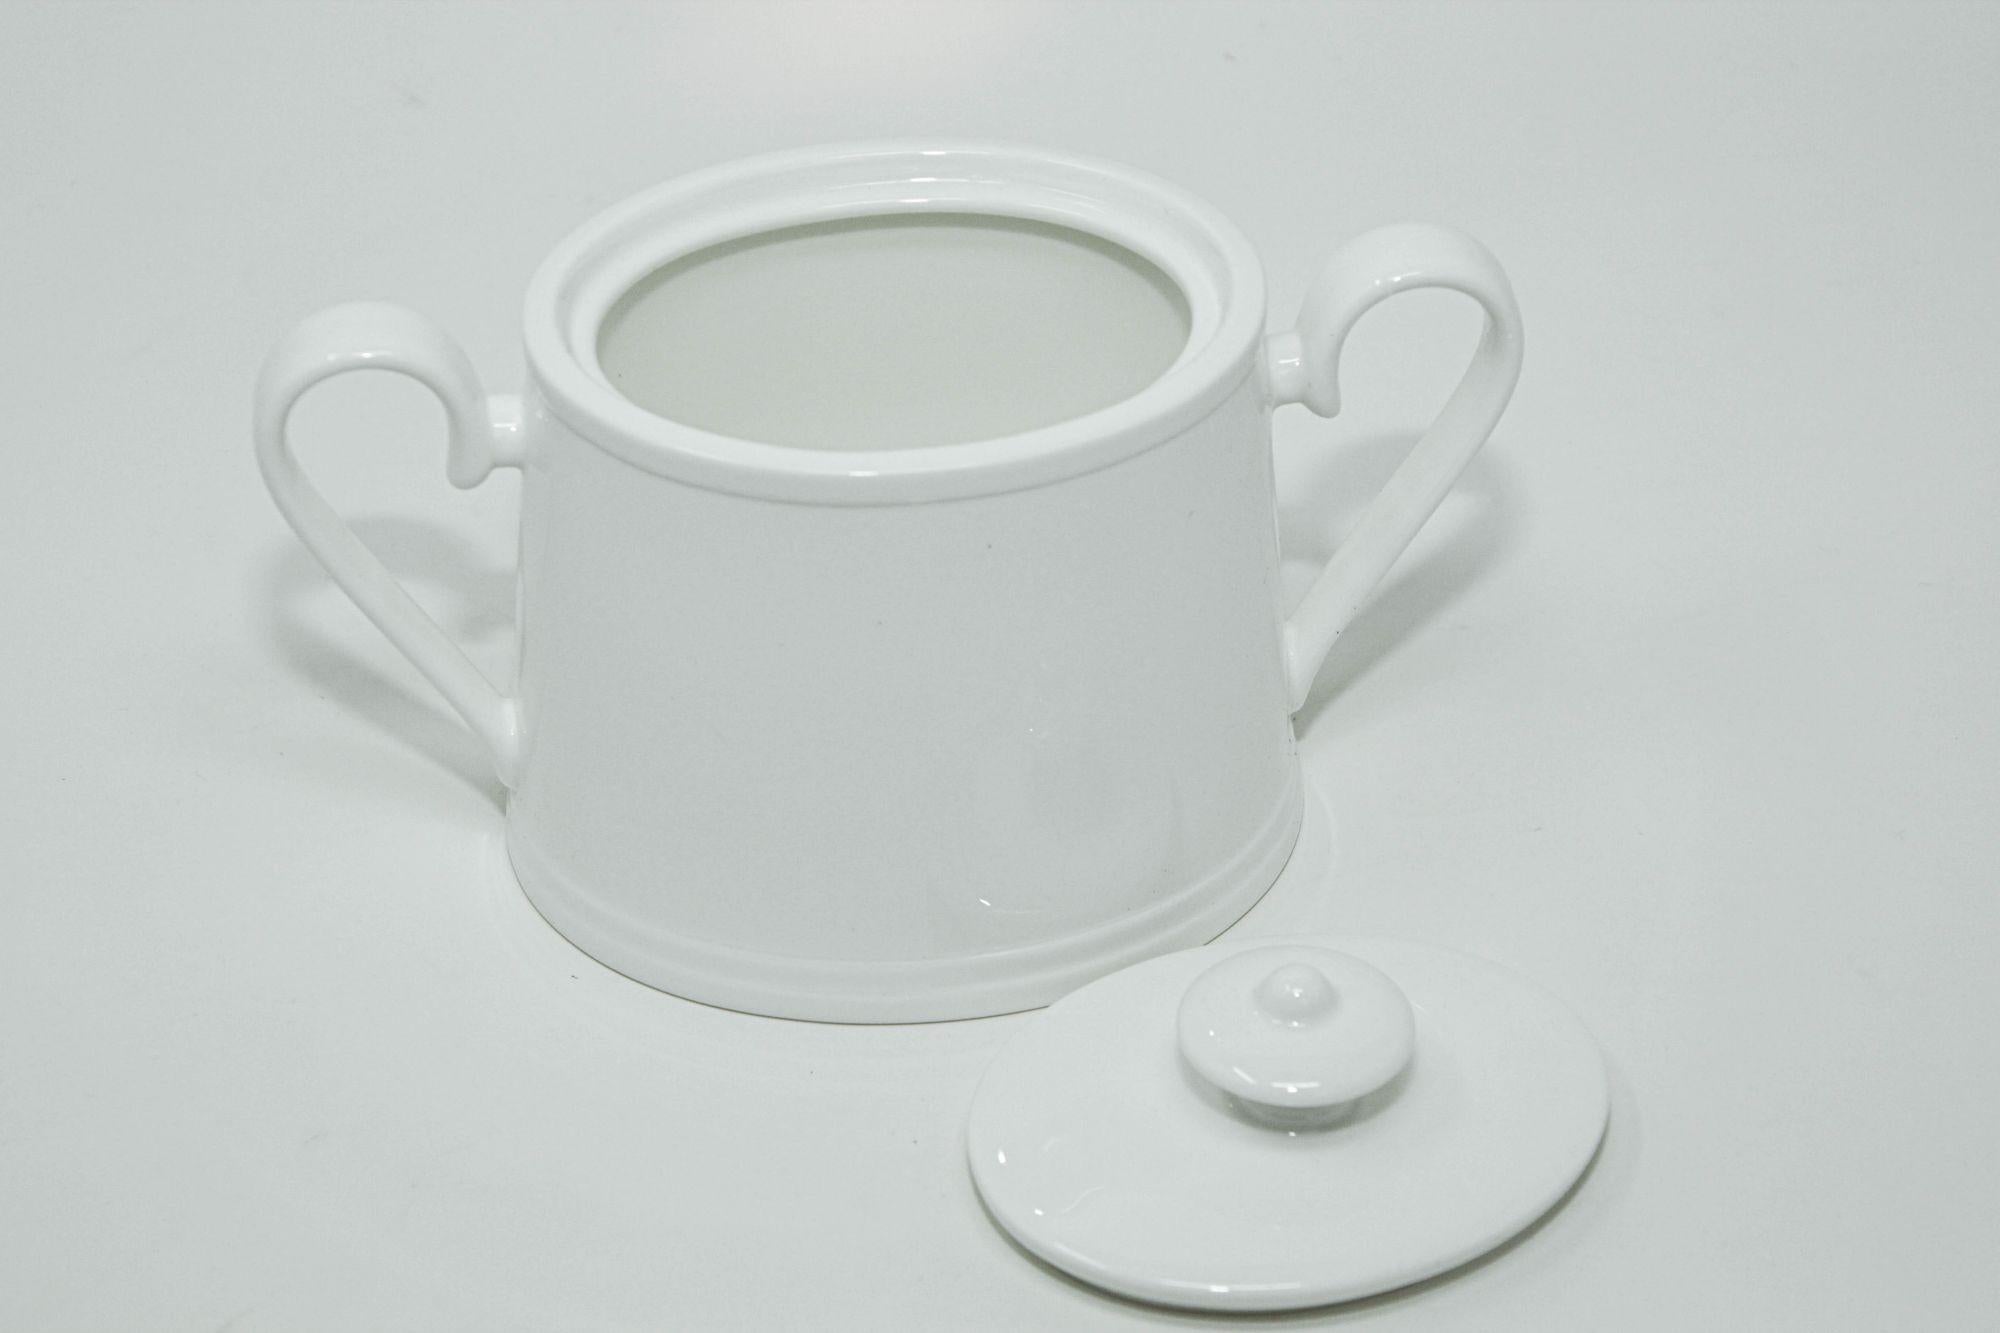 German Villeroy & Boch Stella Hotel white Bone China Sugar Bowl with Cover For Sale